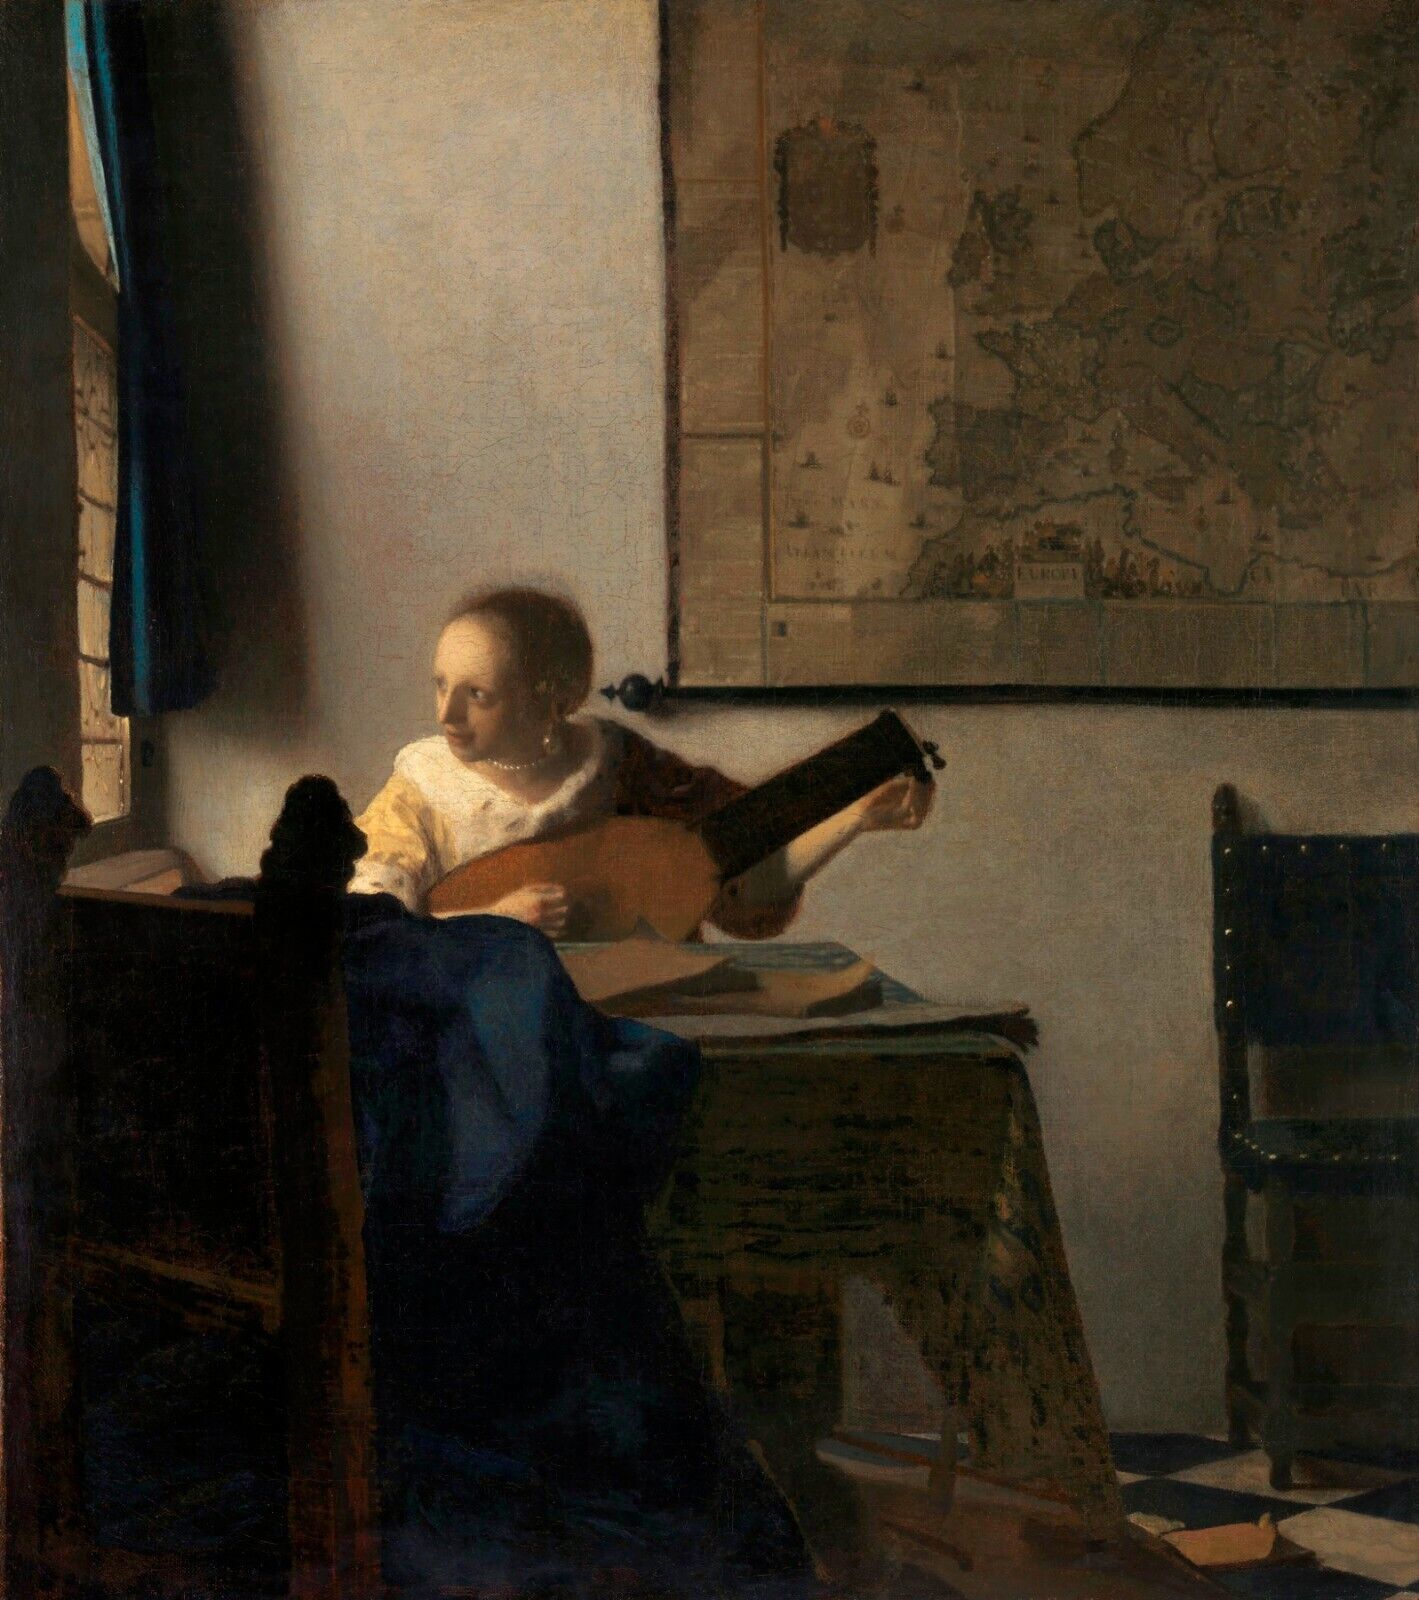 Primary image for 12510.Room Wall Poster.Interior art design.Vermeer painting.Woman with a Lute